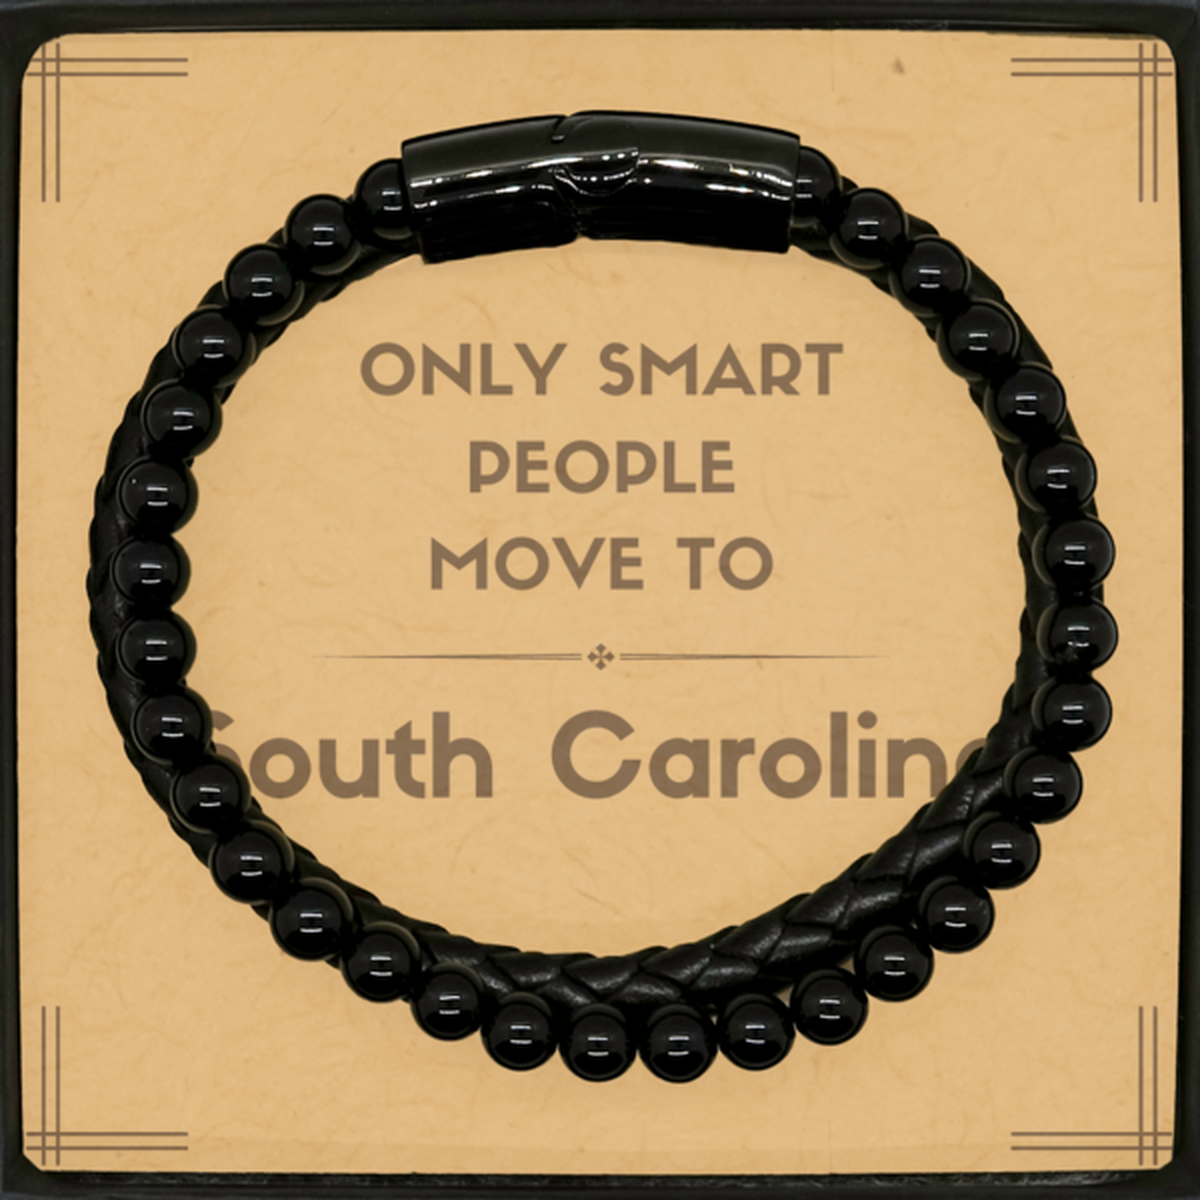 Only smart people move to South Carolina Stone Leather Bracelets, Message Card Gifts For South Carolina, Move to South Carolina Gifts for Friends Coworker Funny Saying Quote